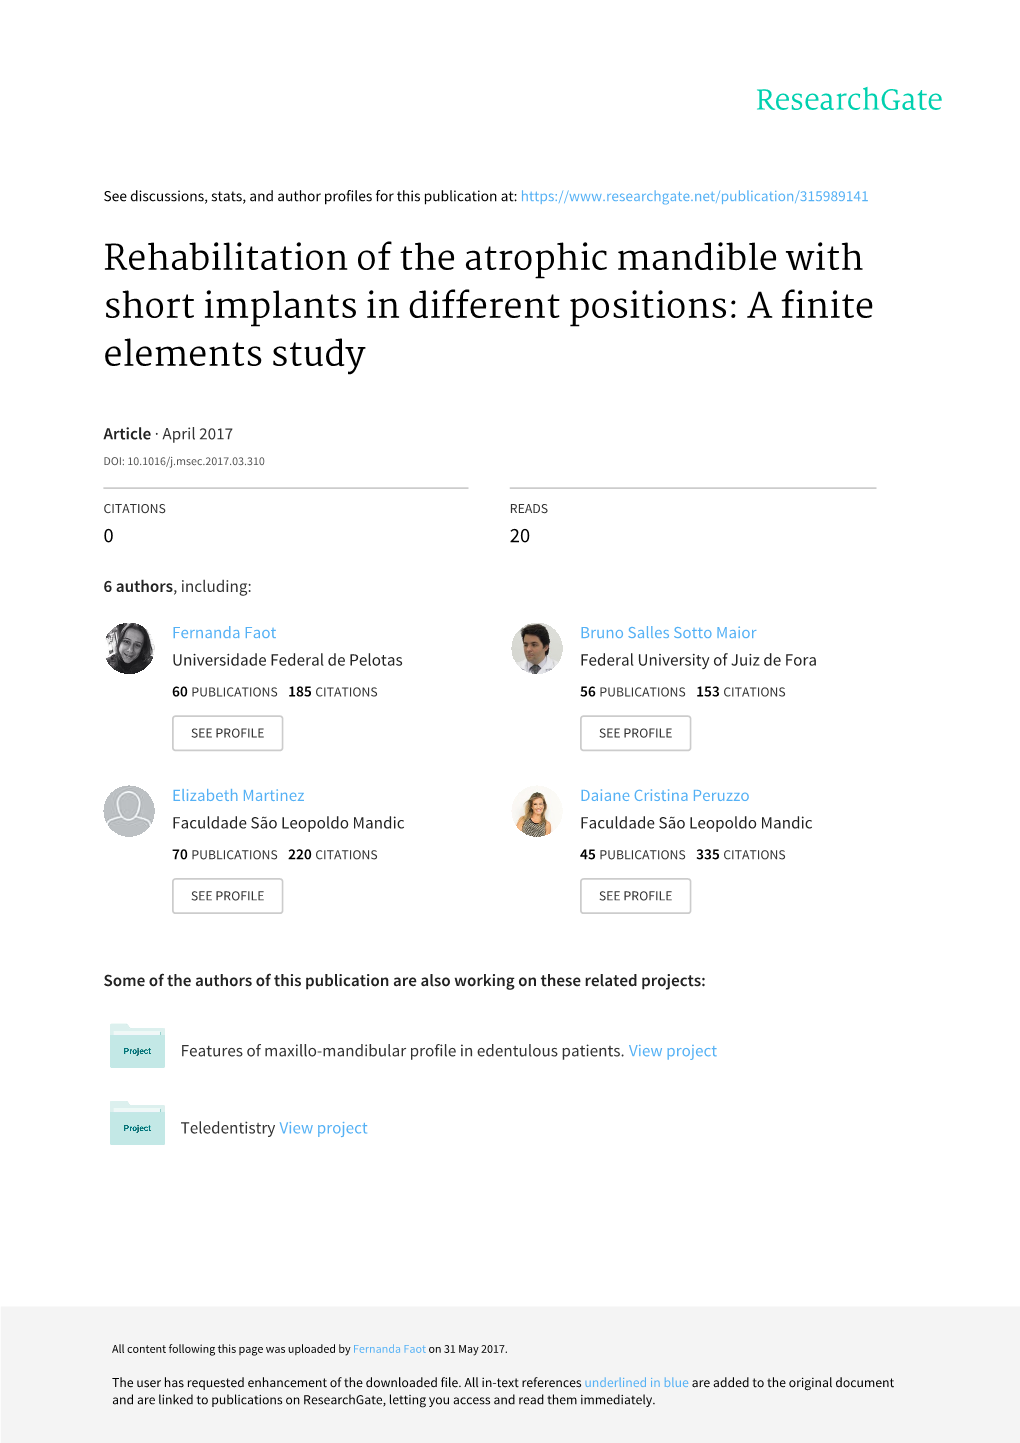 Rehabilitation of the Atrophic Mandible with Short Implants in Different Positions: a Finite Elements Study